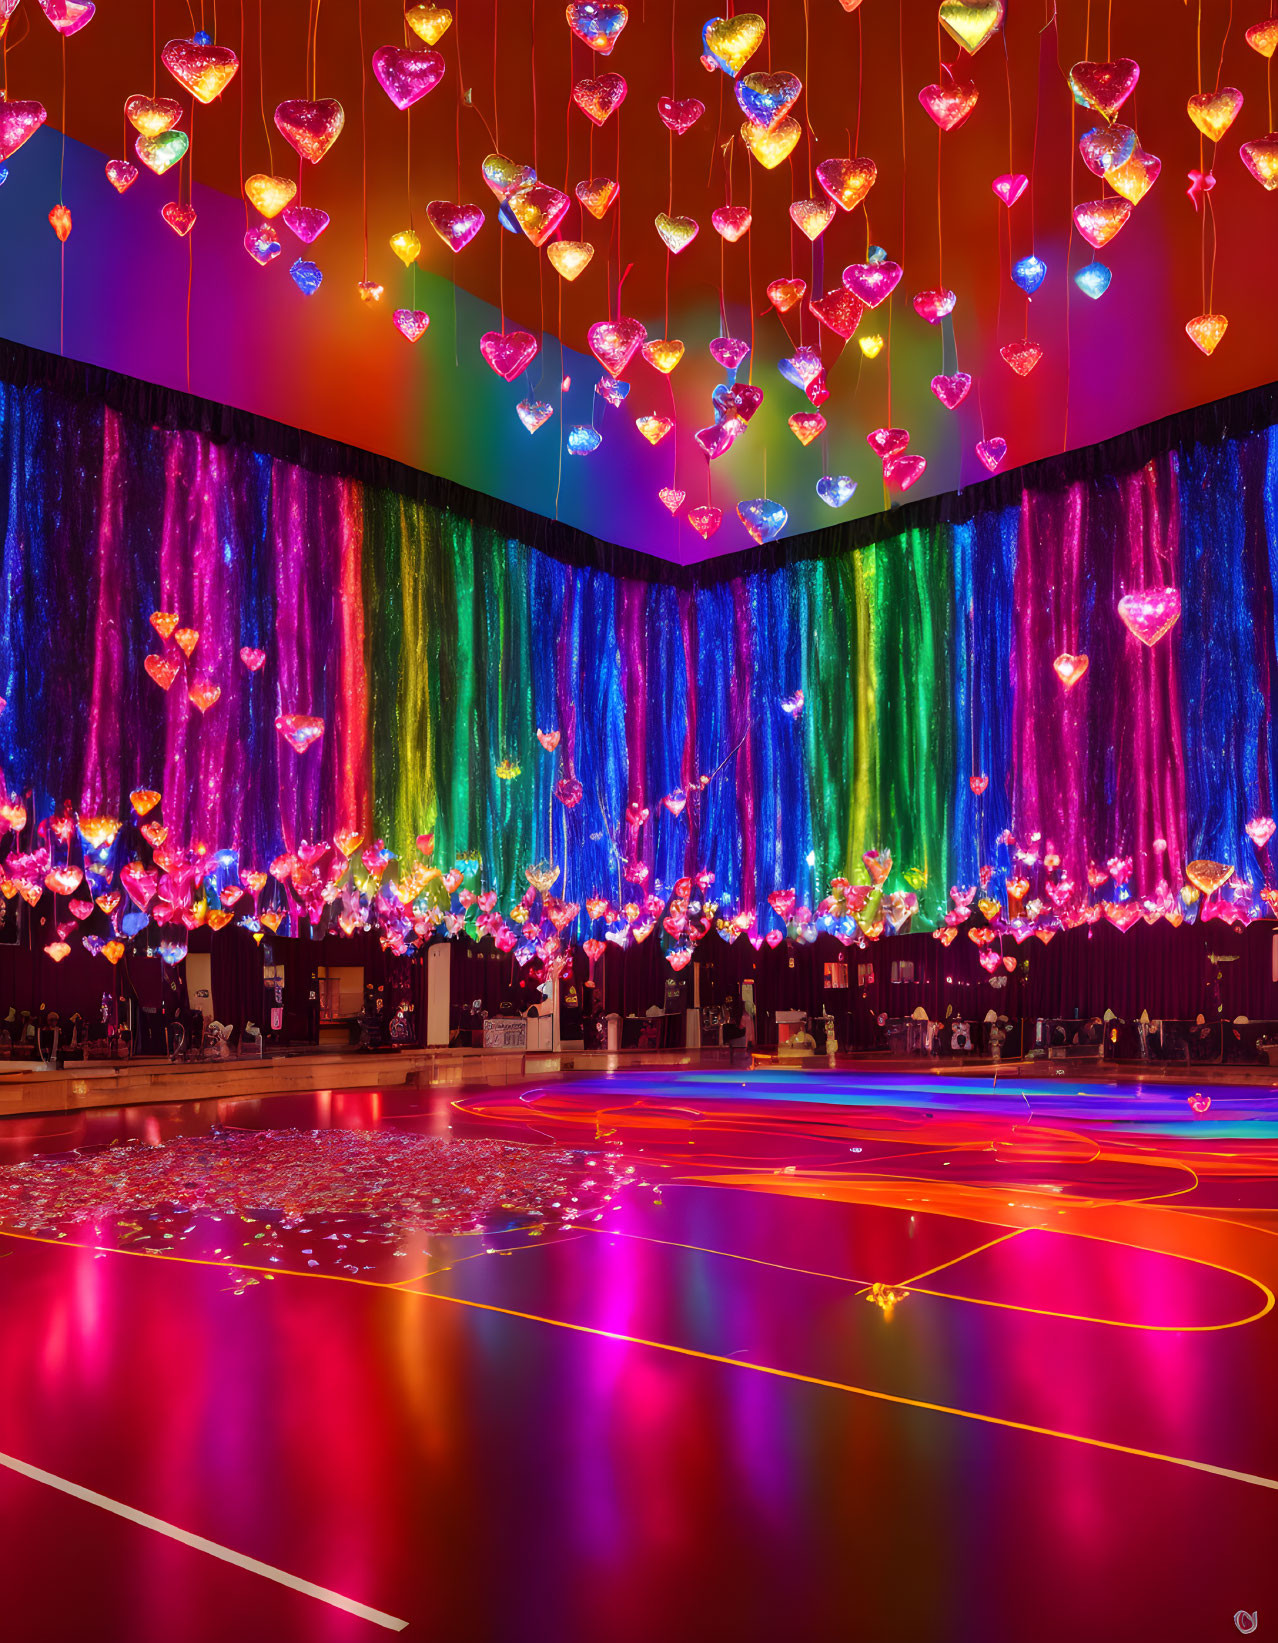 Colorful Room with Heart-shaped Lights & Neon Lines